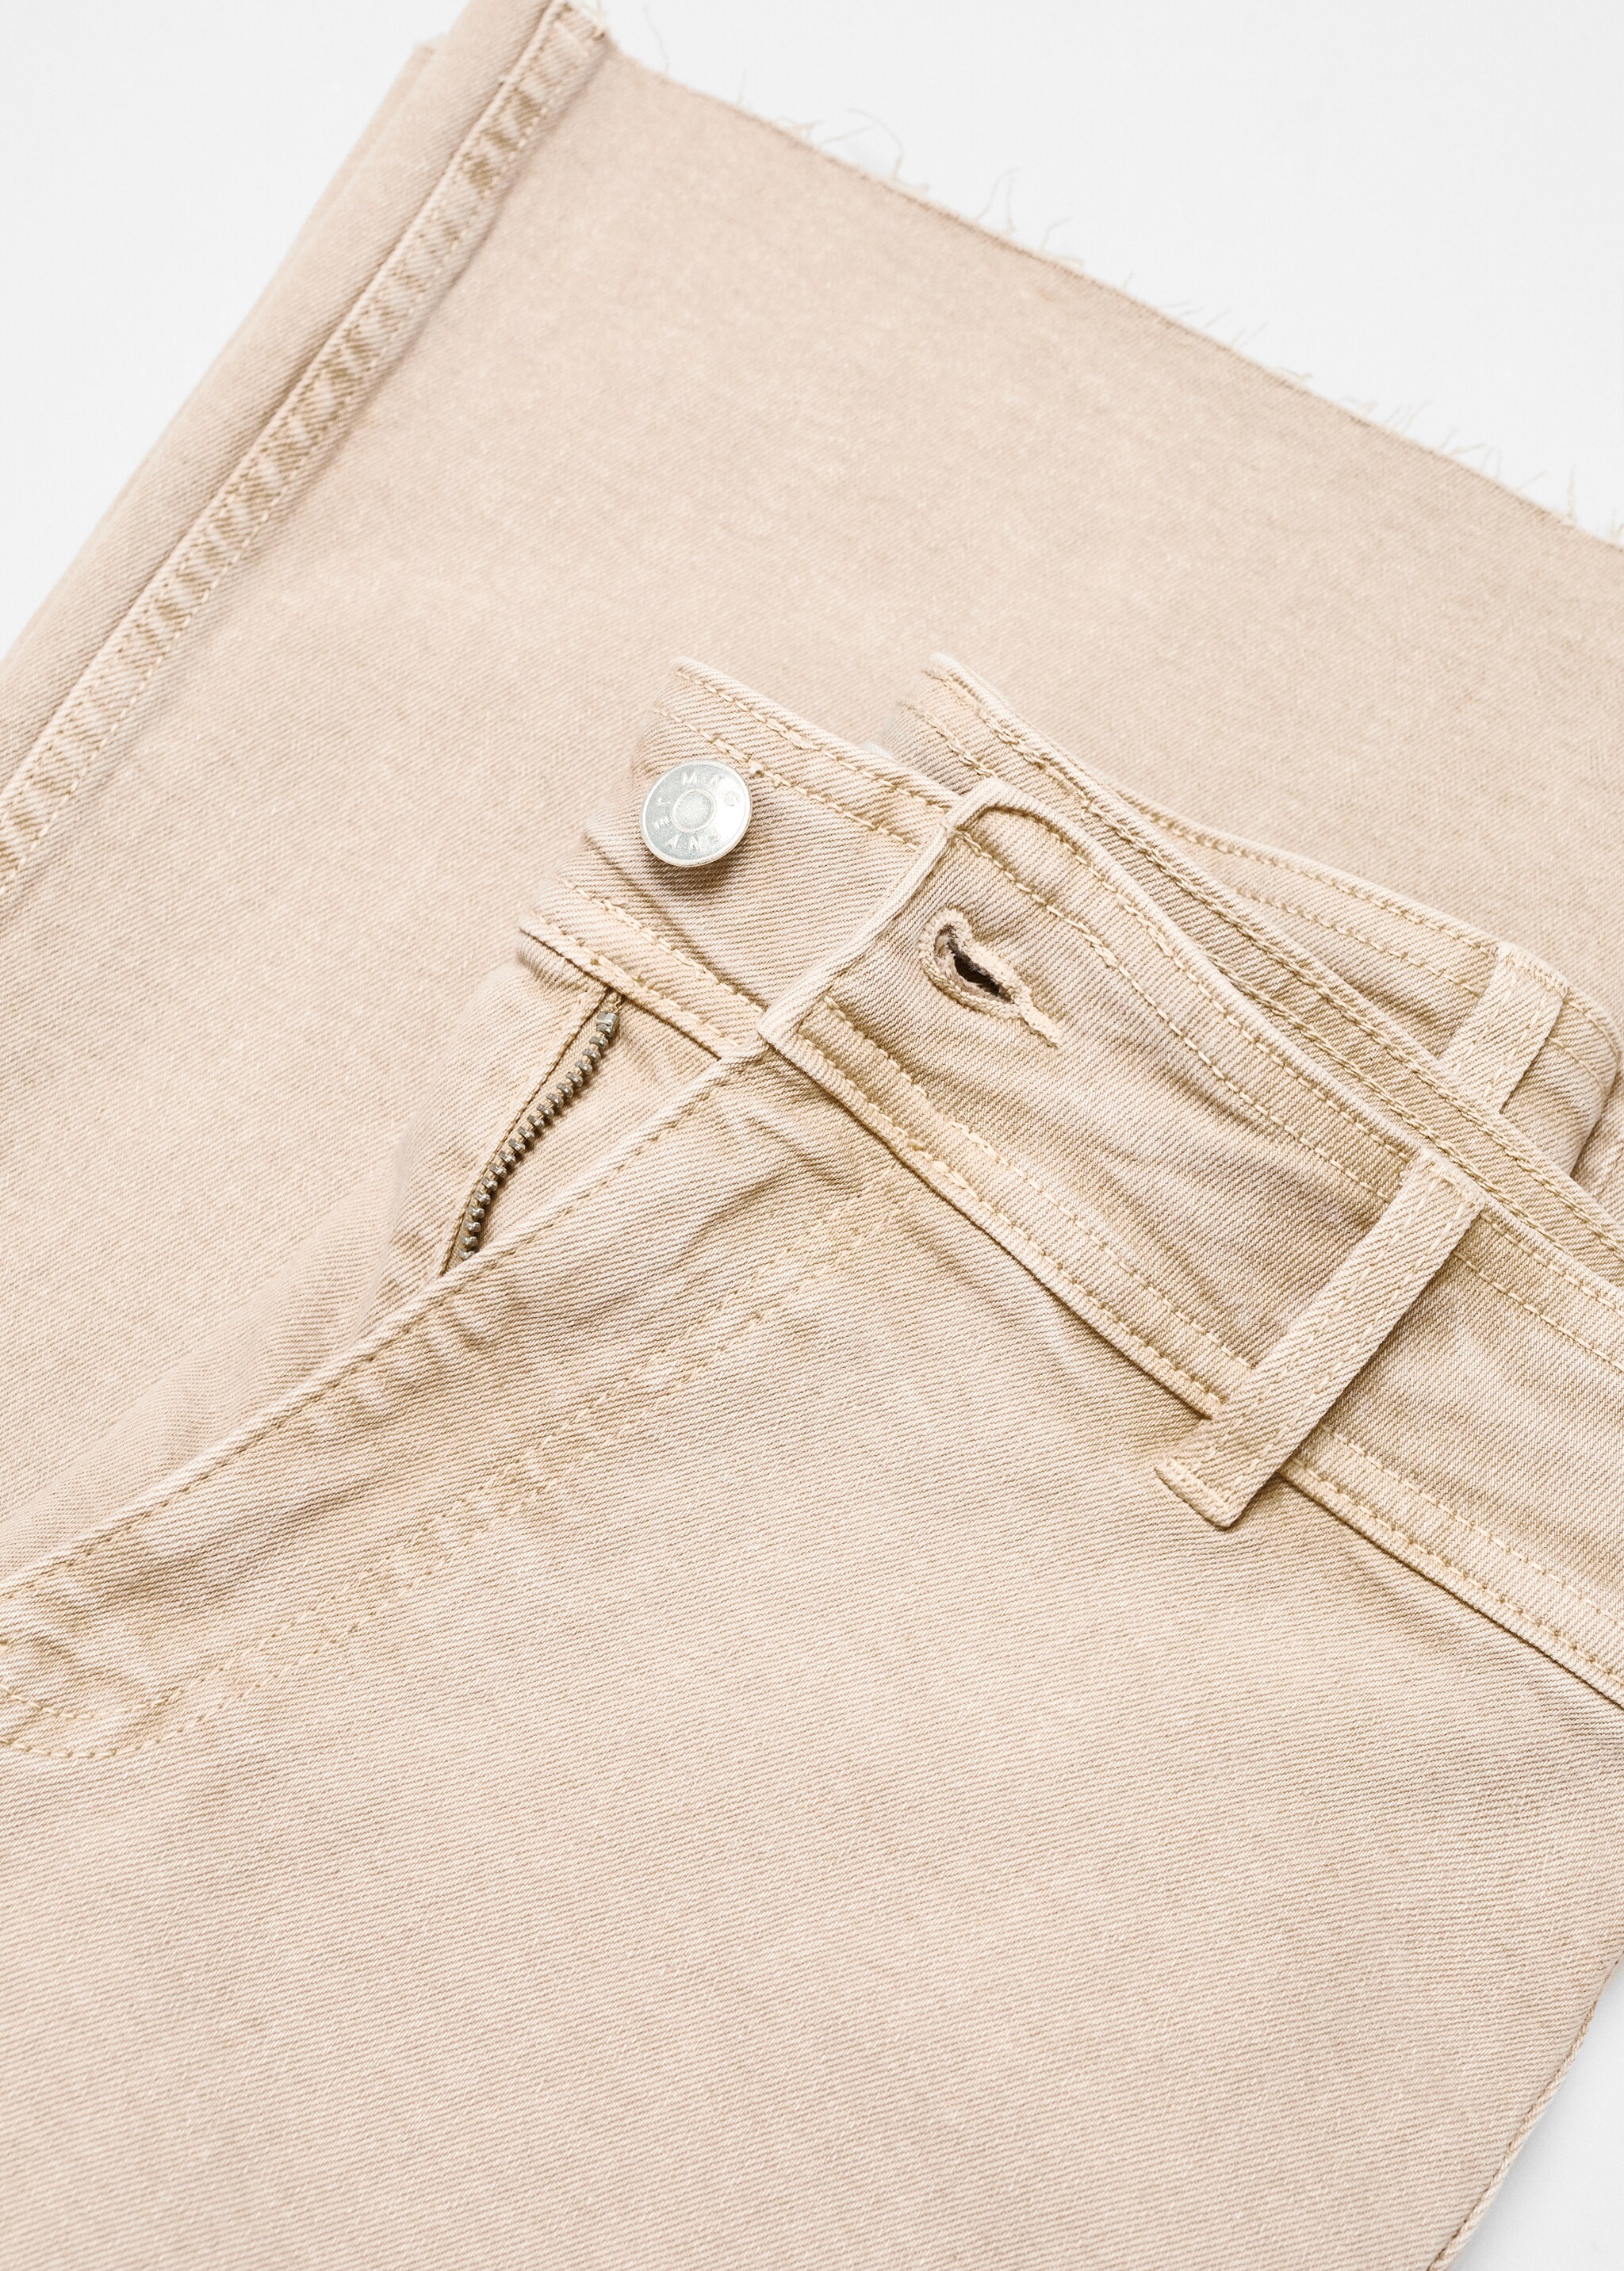 Catherin culotte high rise jeans - Details of the article 8